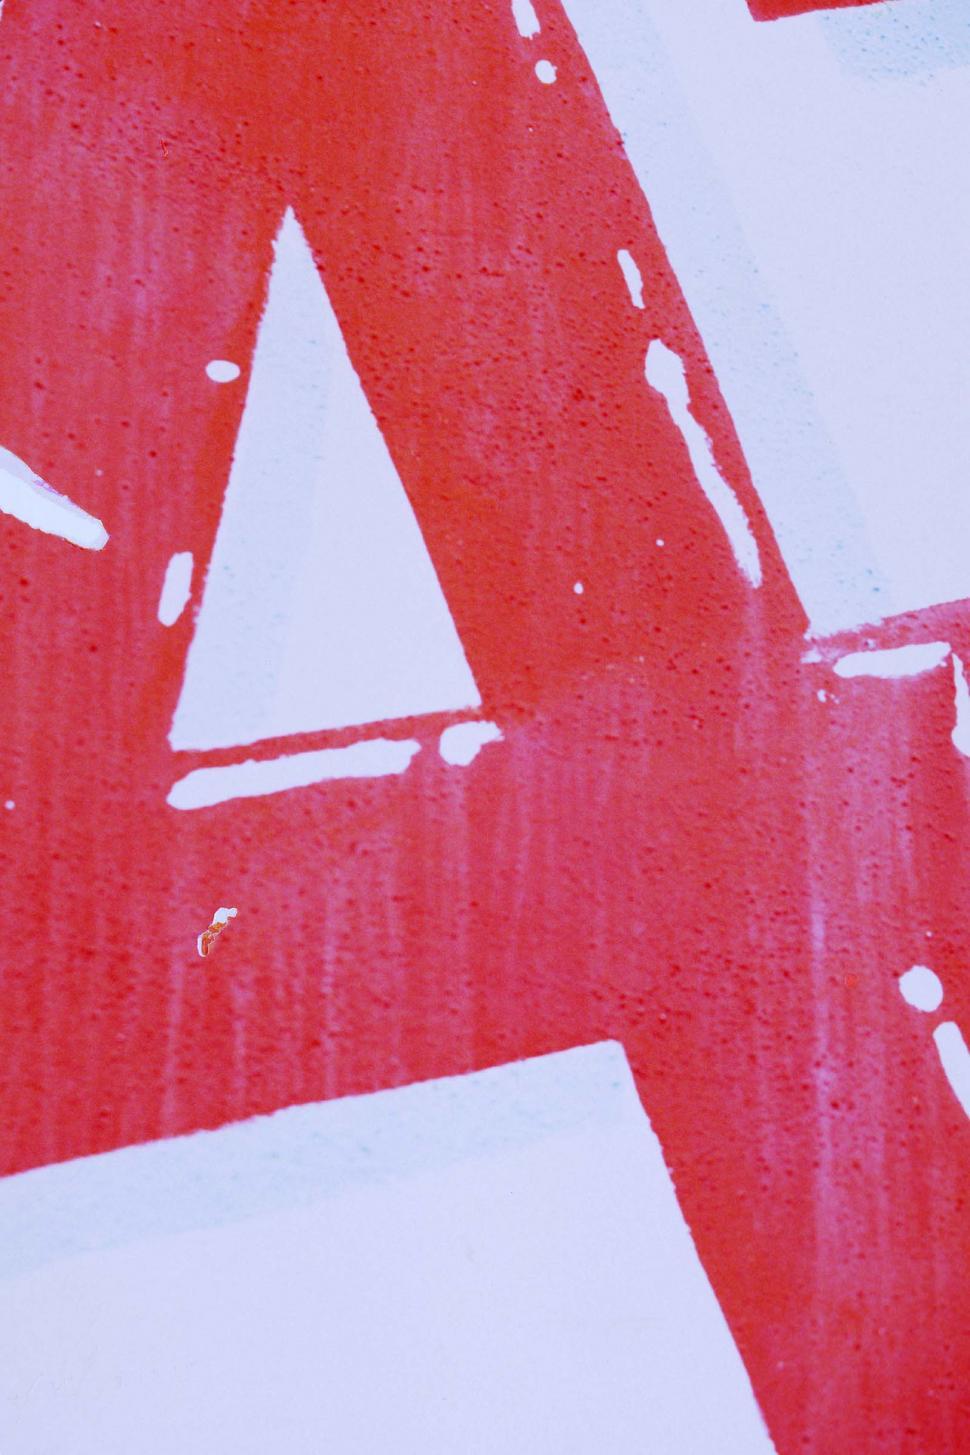 Free Image of Red and White Sign With Triangle 